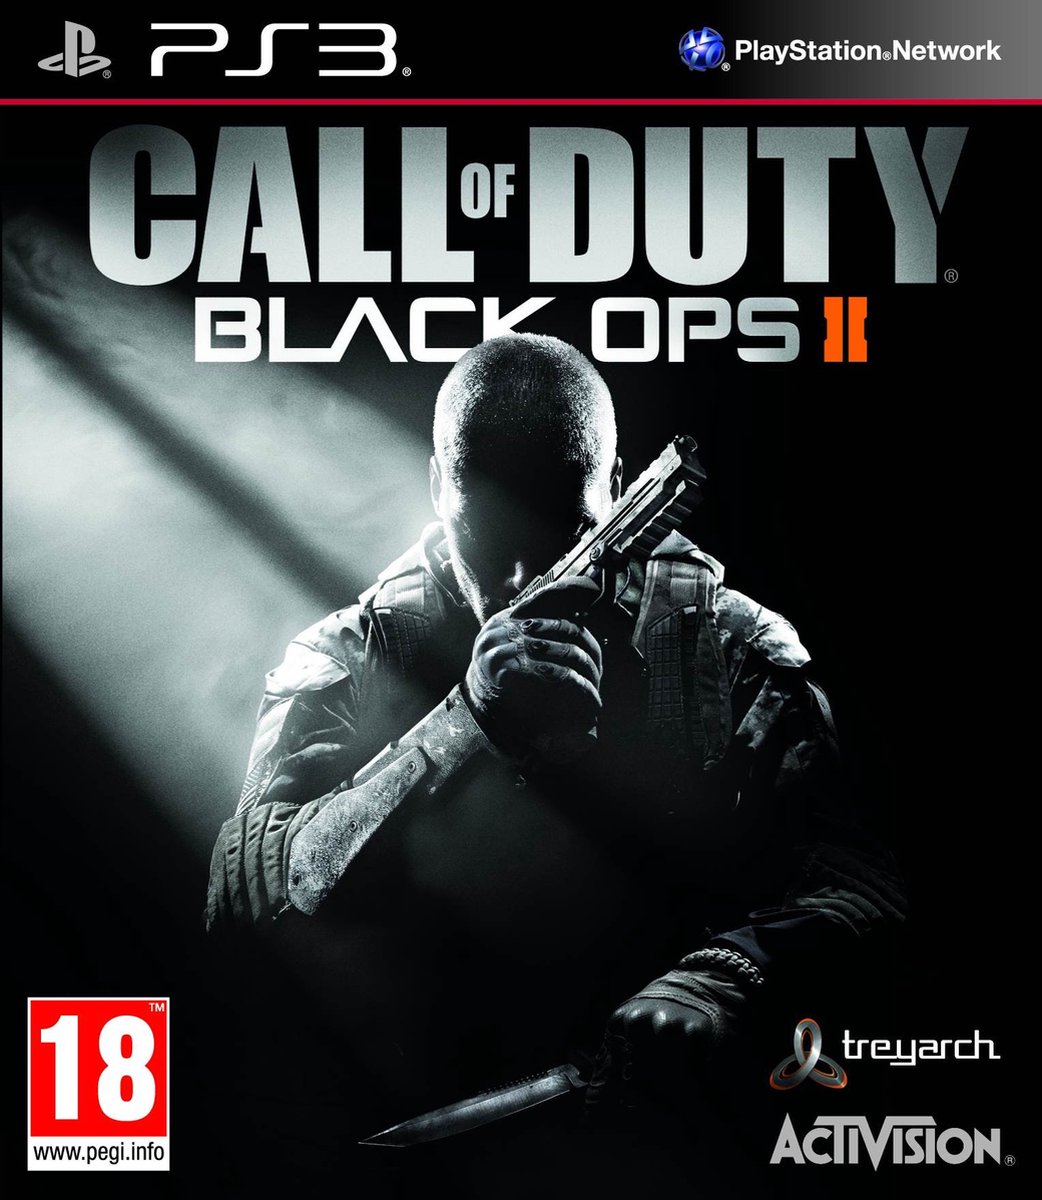 Call of Duty: Black Ops 2 - PS3 - Activision Blizzard Entertainment